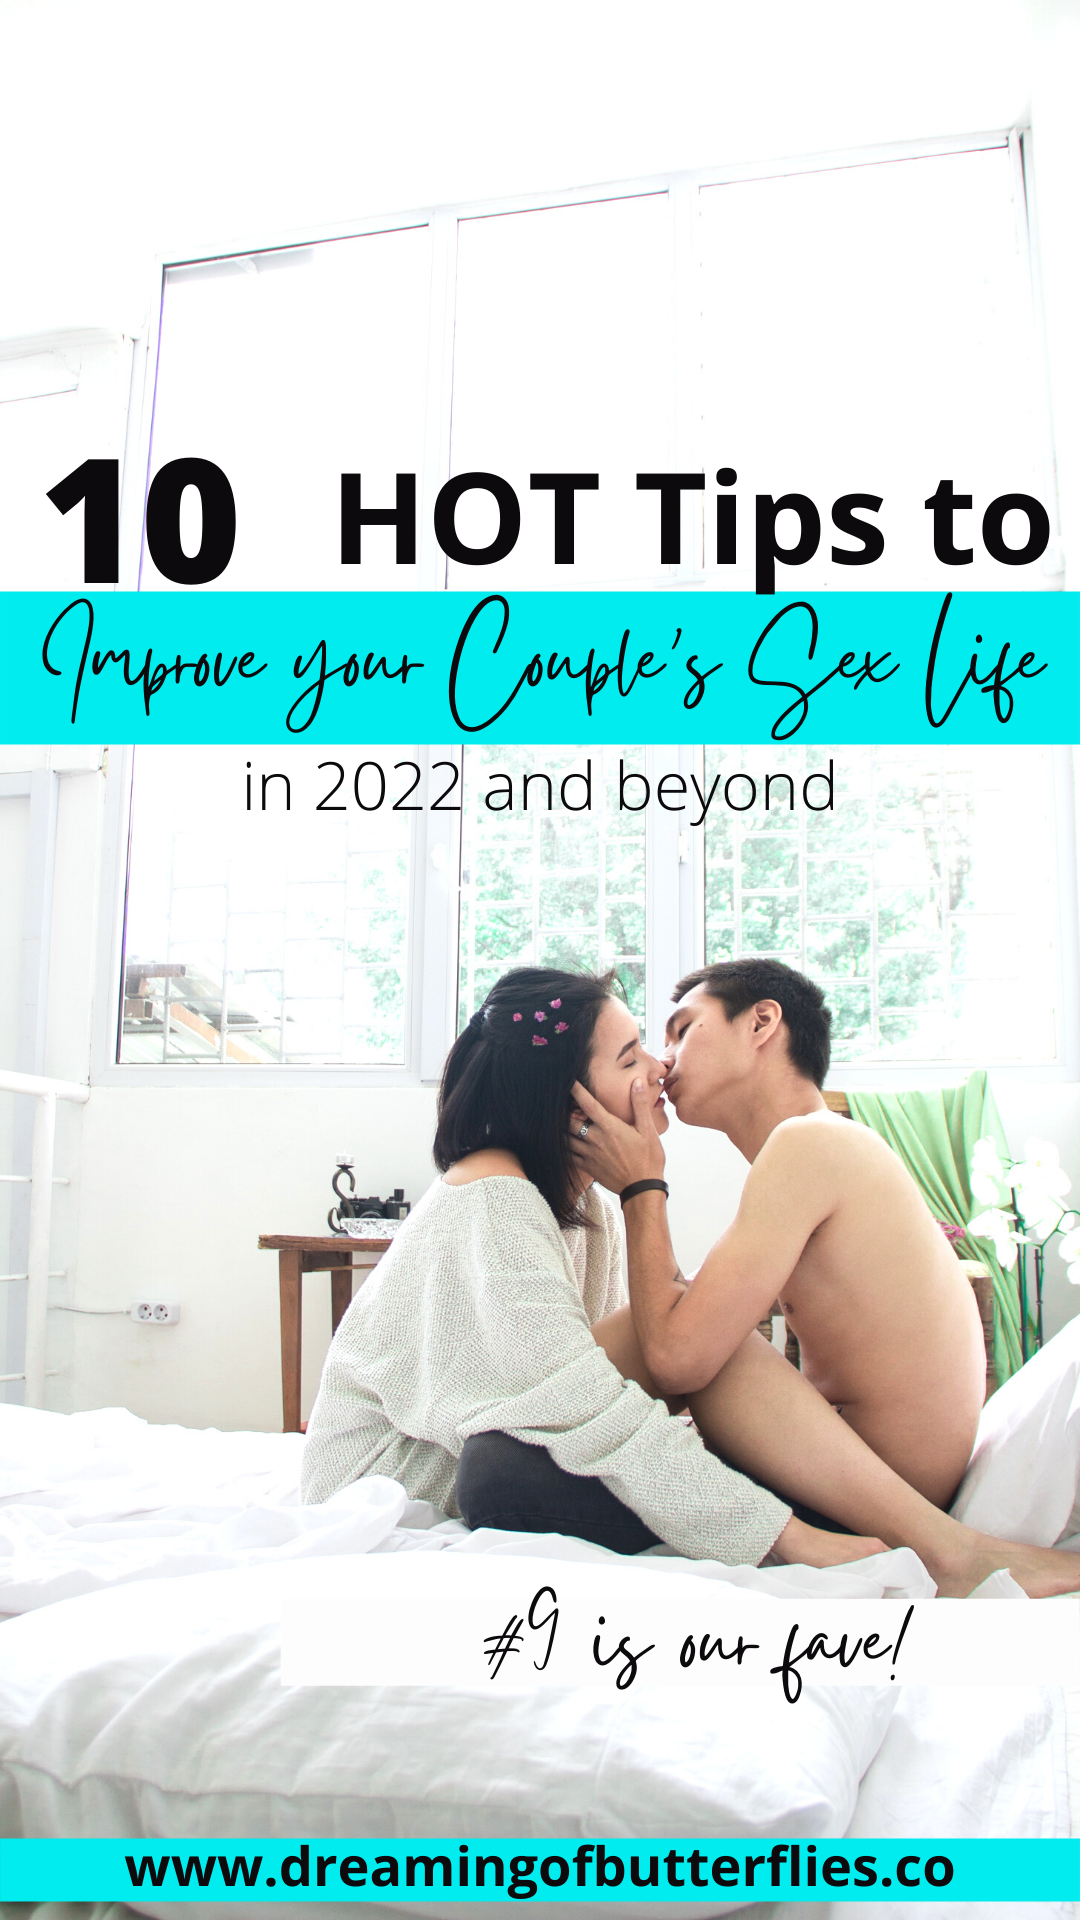 10 HOT Tips to Improve your Couples Sex Life » Dreaming of Butterflies